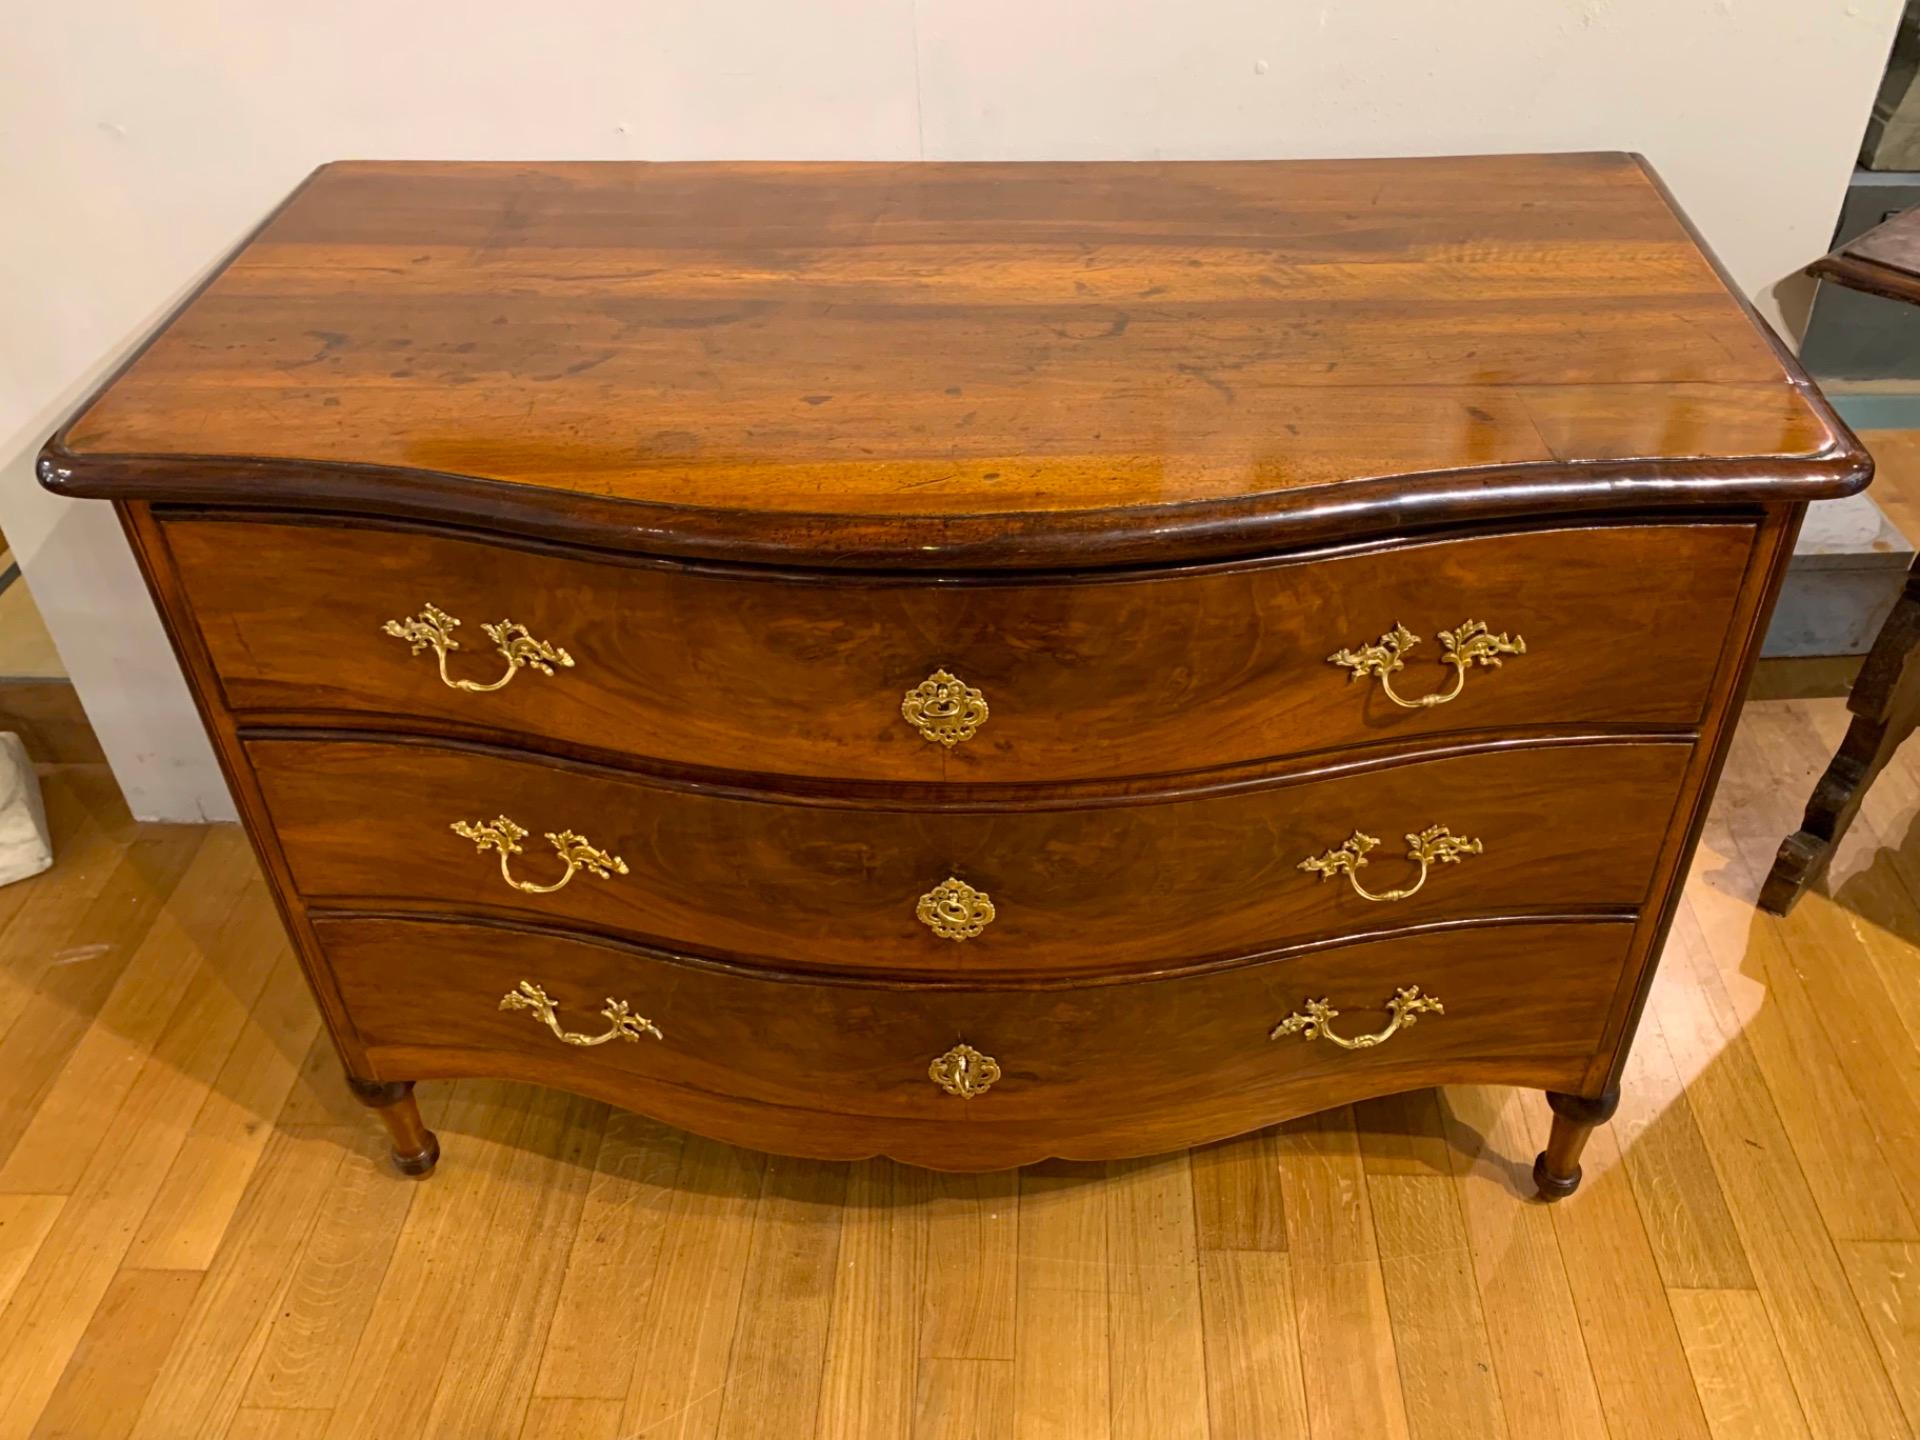 18th Century 18th CENTURY VENETIAN CHEST OF DRAWERS IN SOLID AND VENEREED WALNUT  For Sale